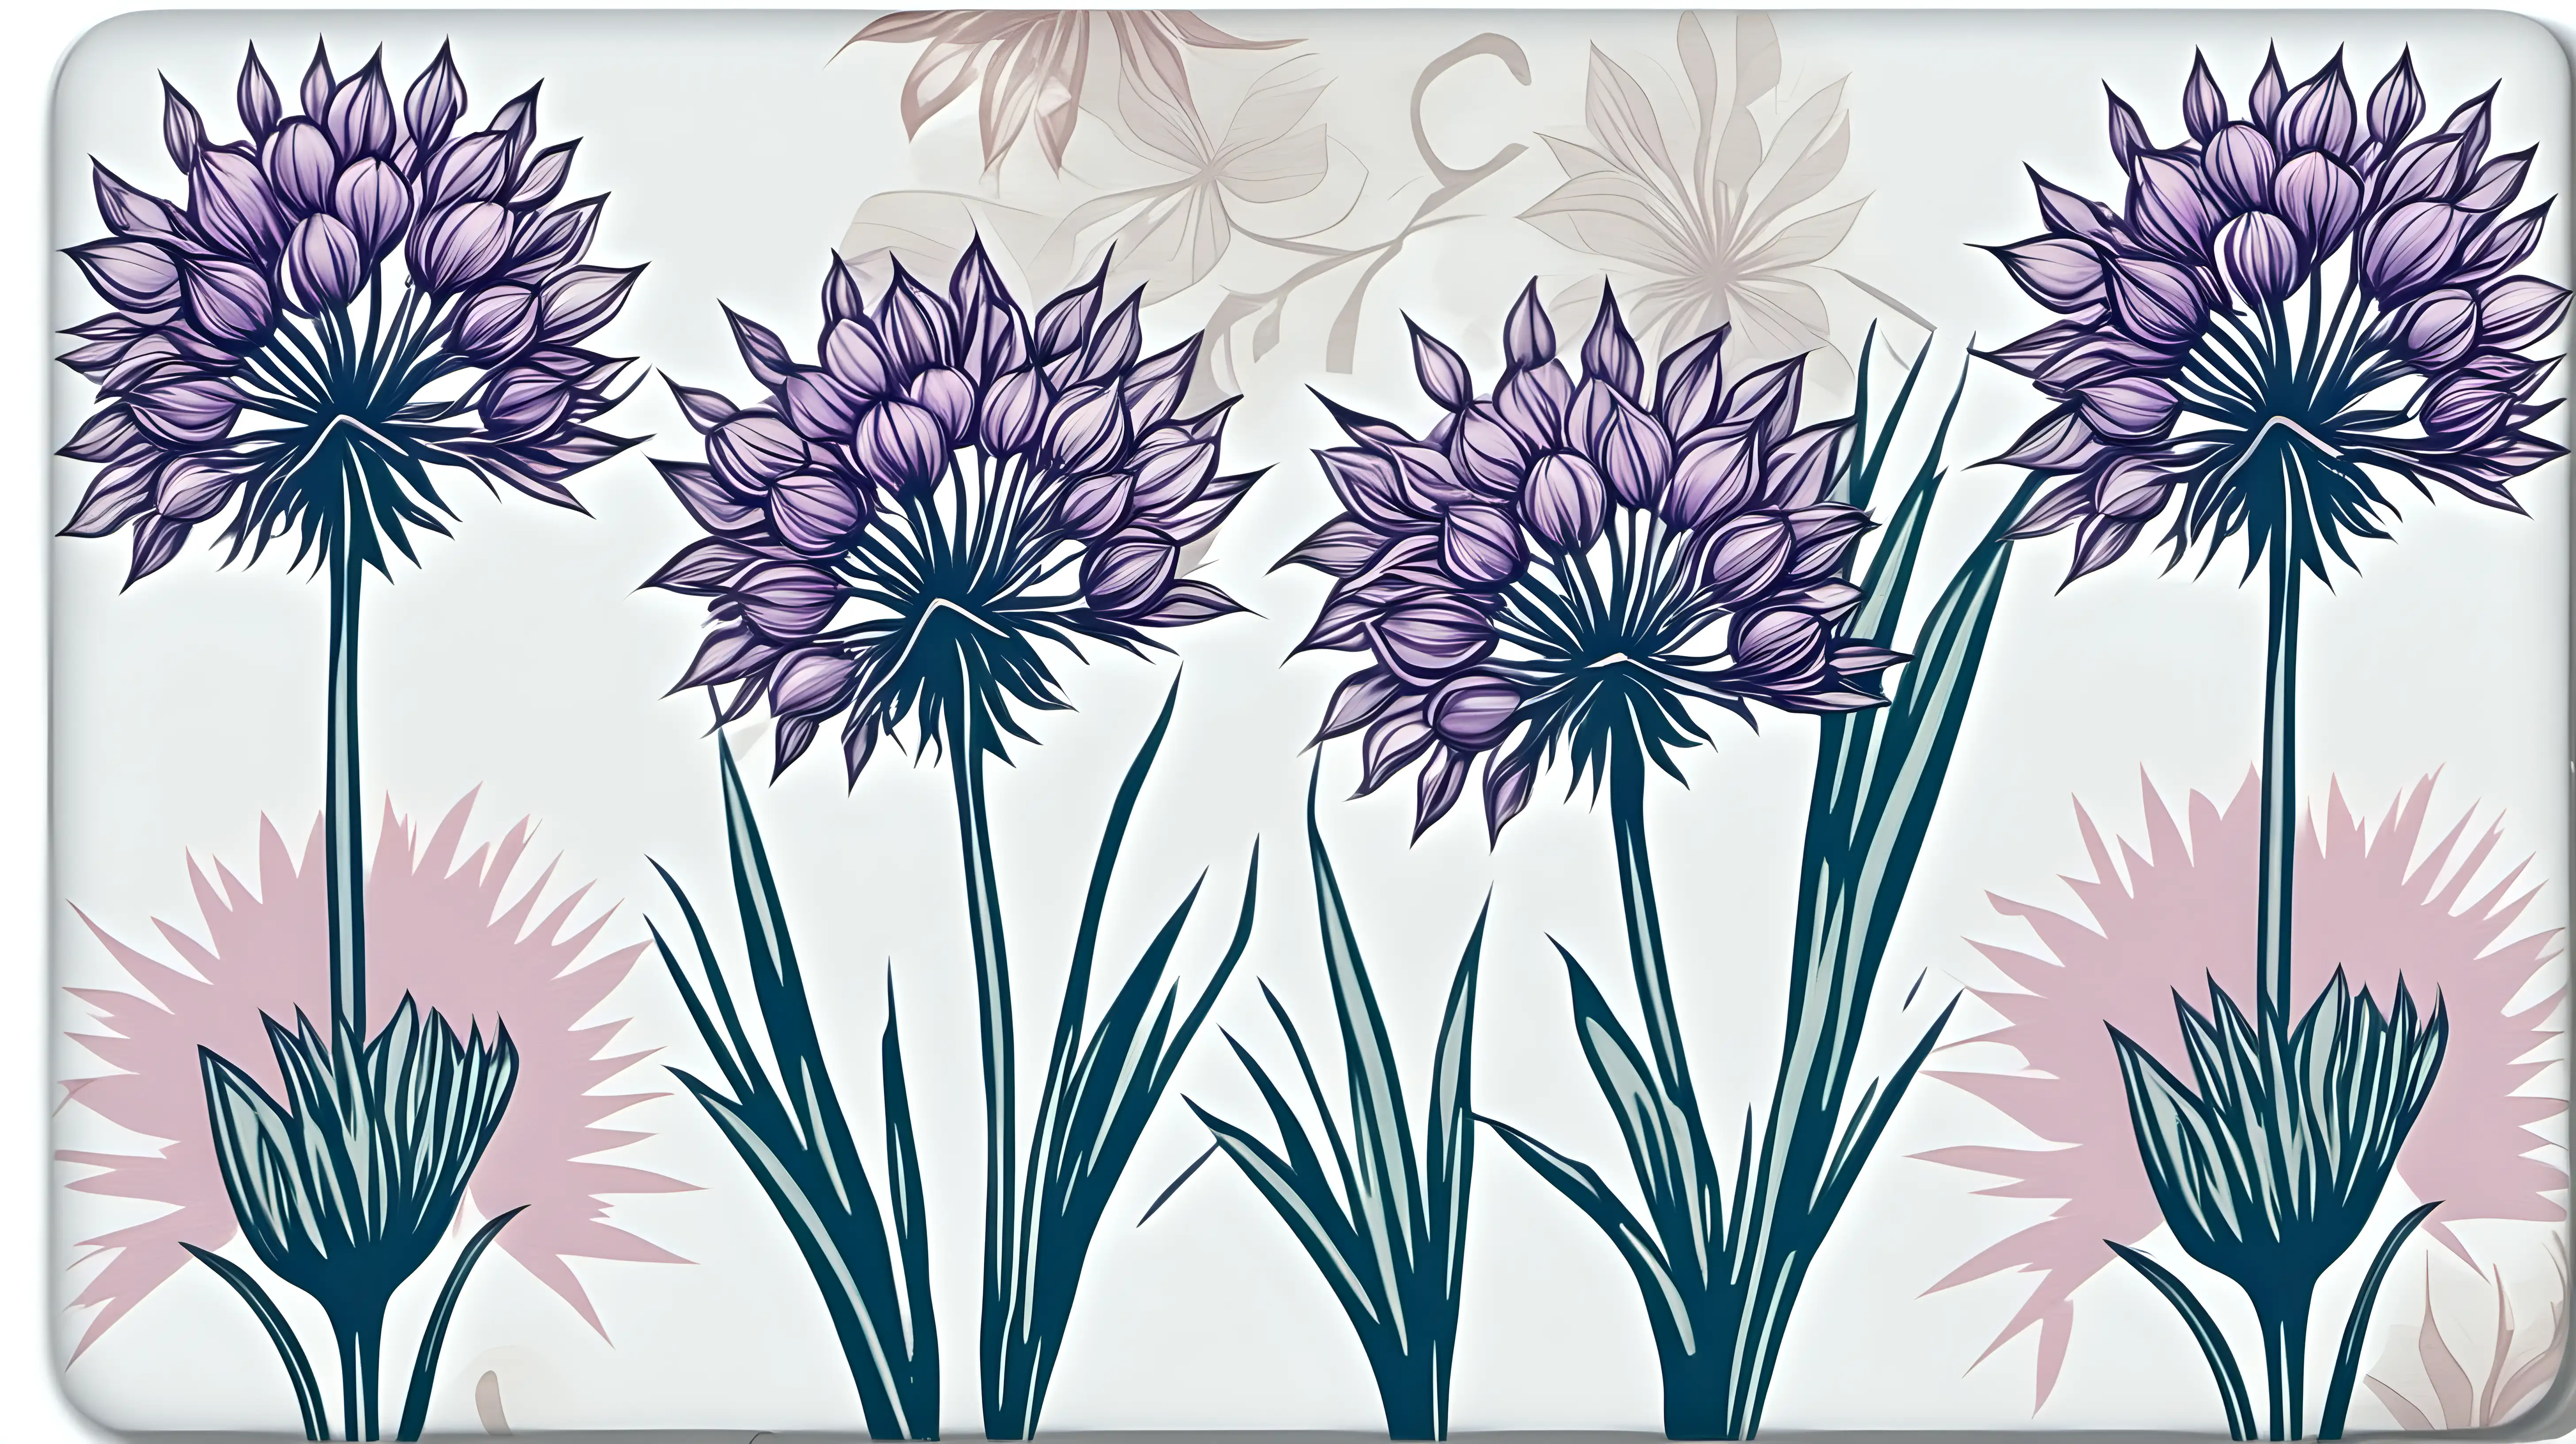 Pastel Watercolor Ornamental Onion Flowers Clipart on White Background Andy Warhol Inspired Tile